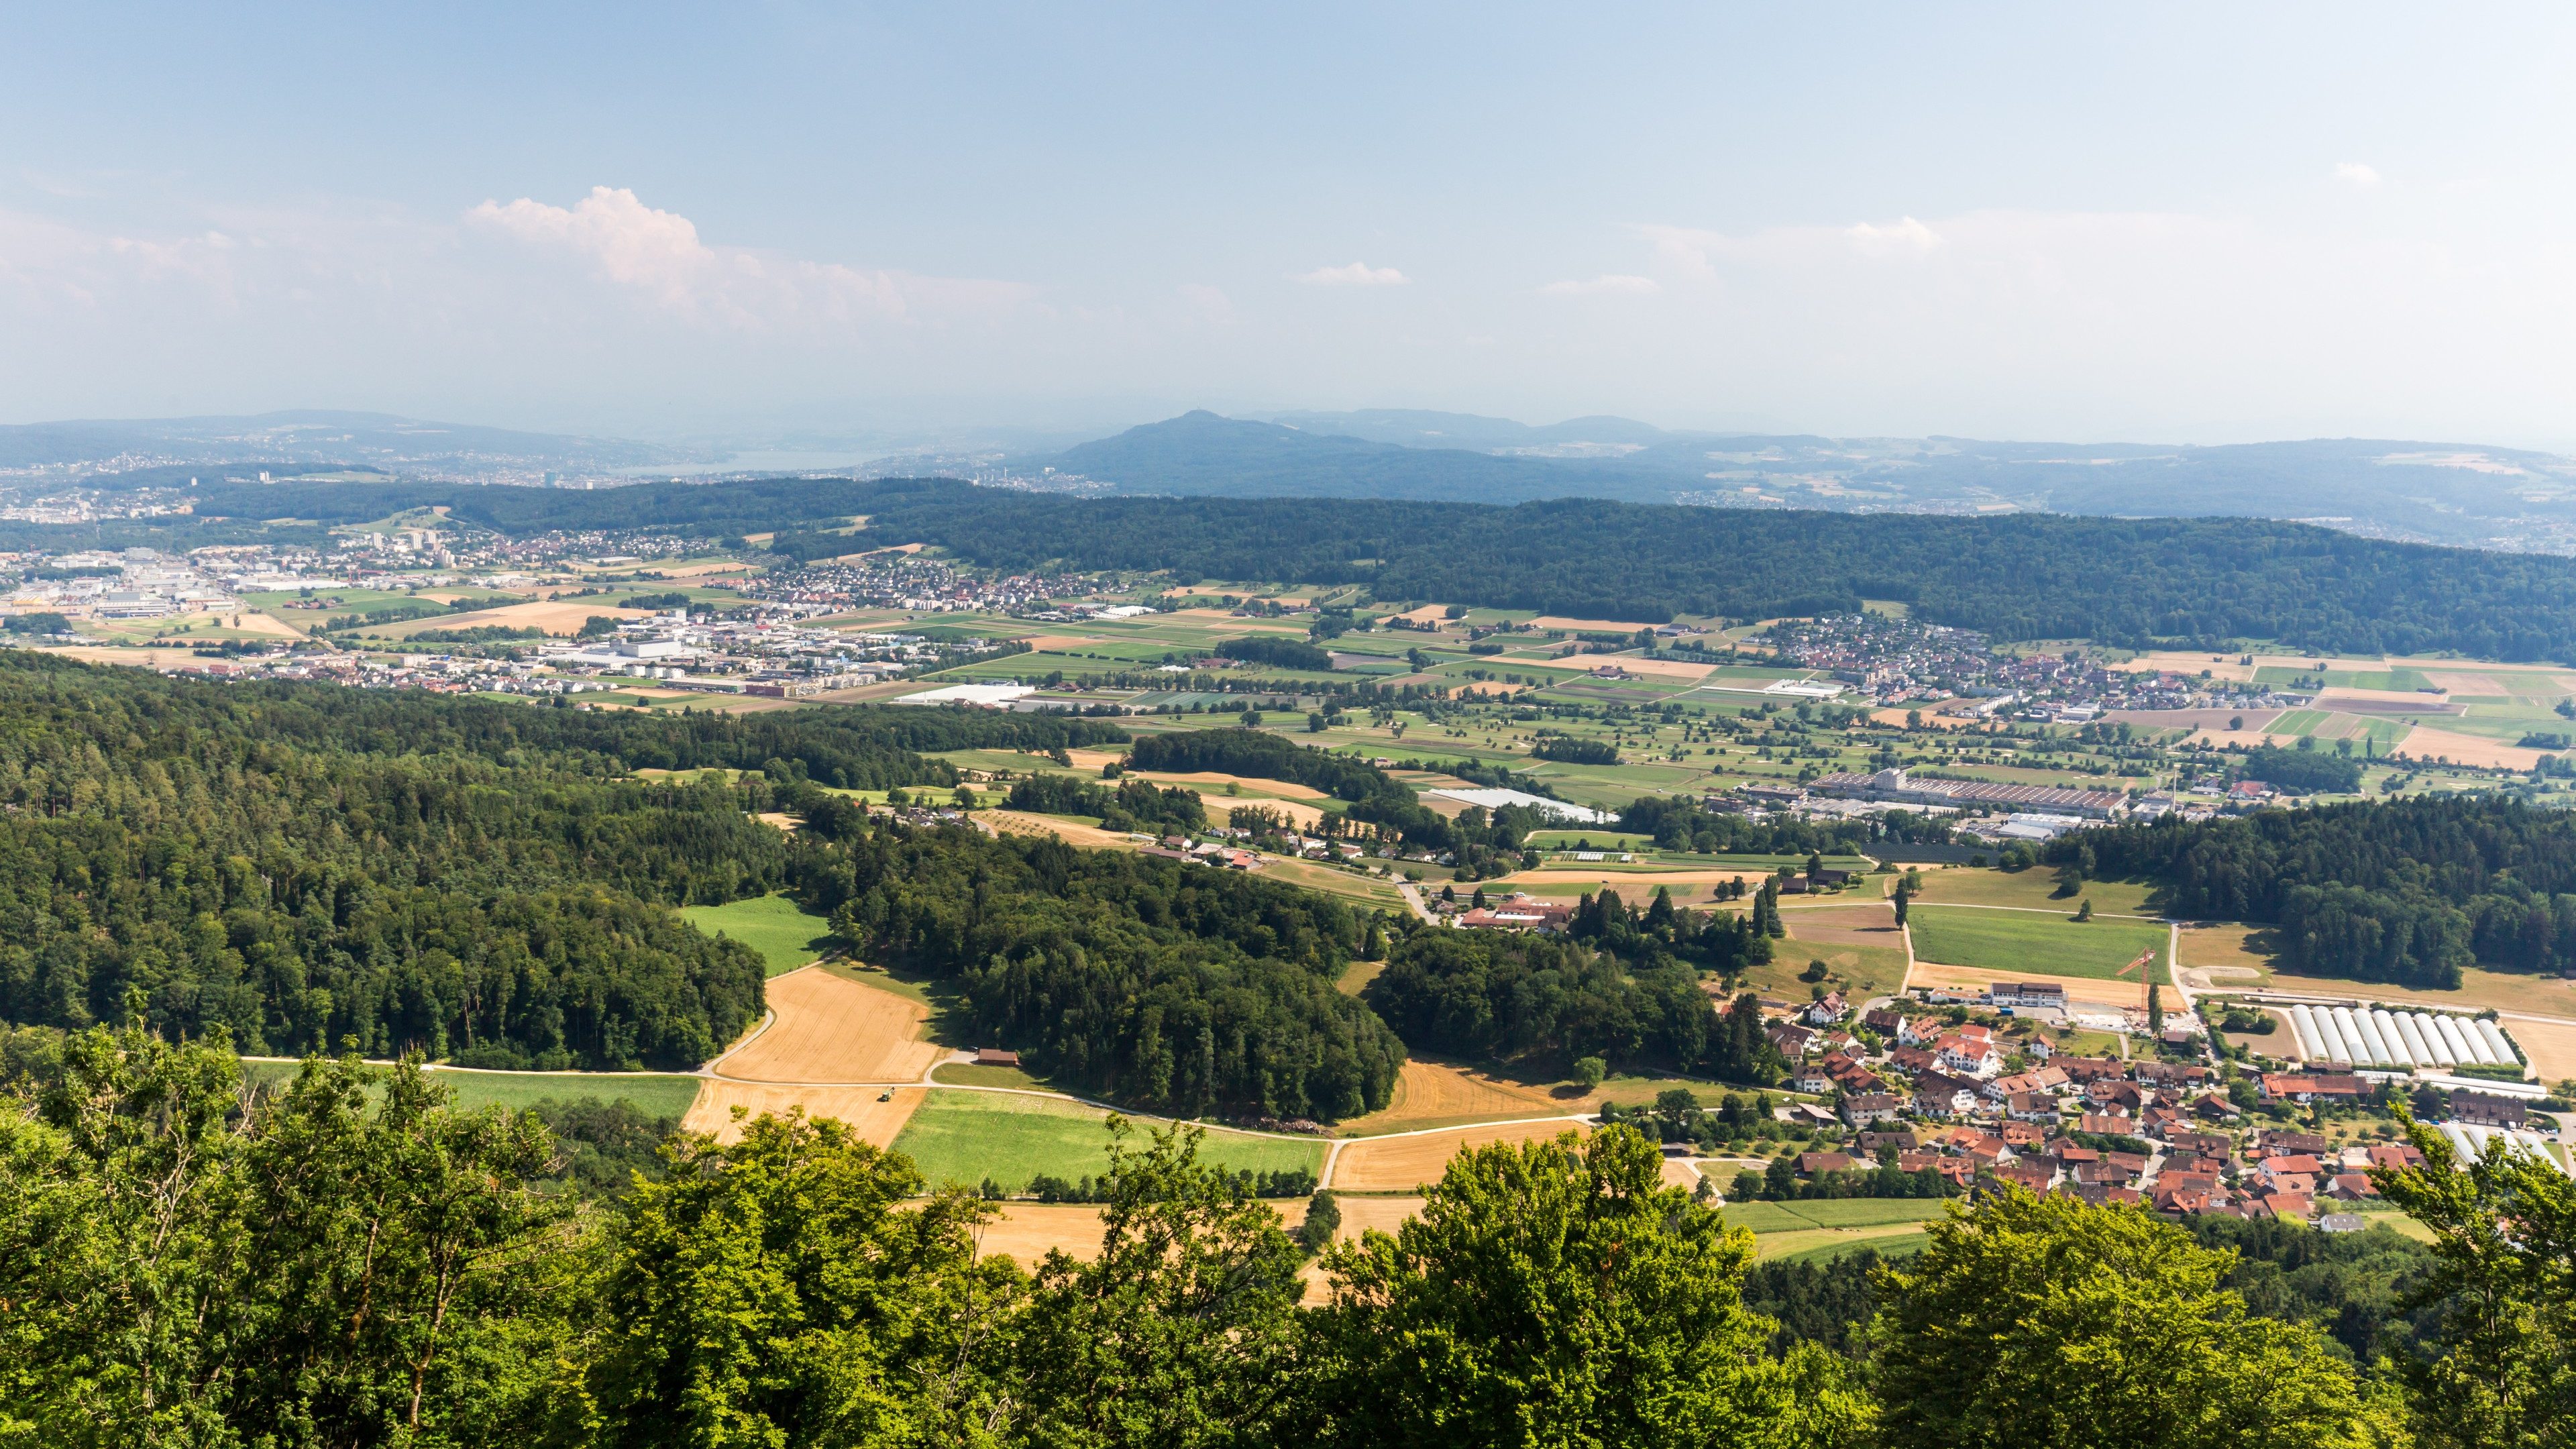 Views from to Mountain Lagern to Zurich and the villages around, Switzerland July 24, 2015.